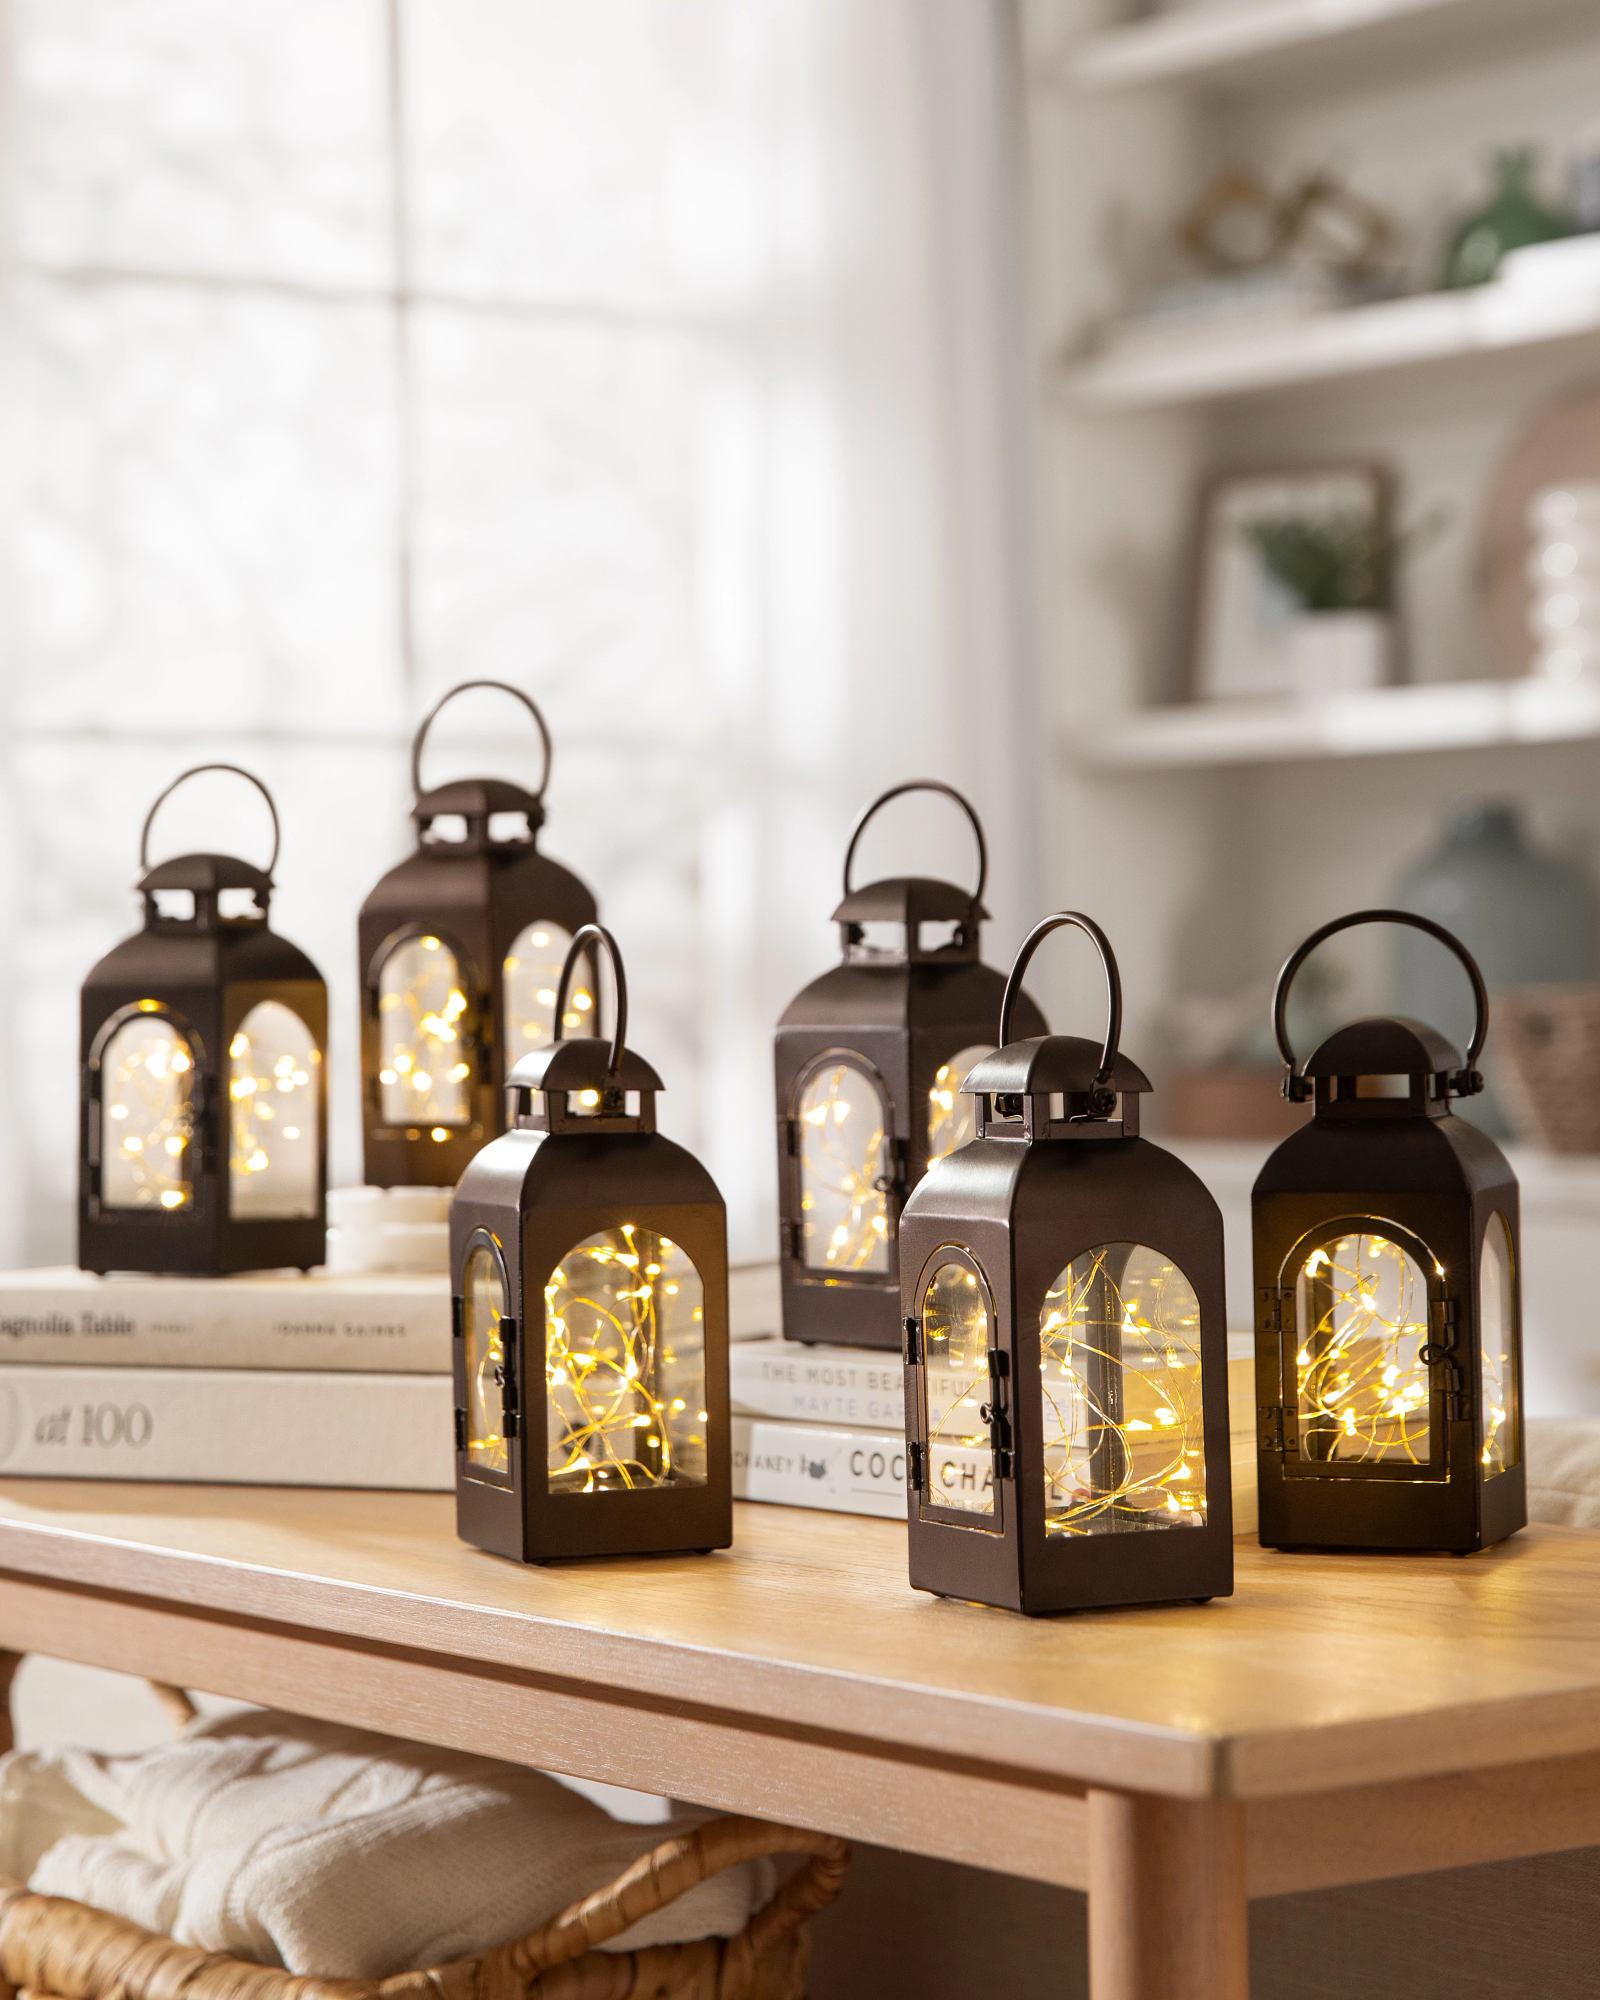 https://source.widen.net/content/c51zlle7dk/jpeg/CDL-2031004_Brown-Fairy-Light-Lanterns_Set-of-6_6in_SSC.jpeg?w=1600&h=2000&keep=c&crop=yes&color=cccccc&quality=100&u=7mzq6p